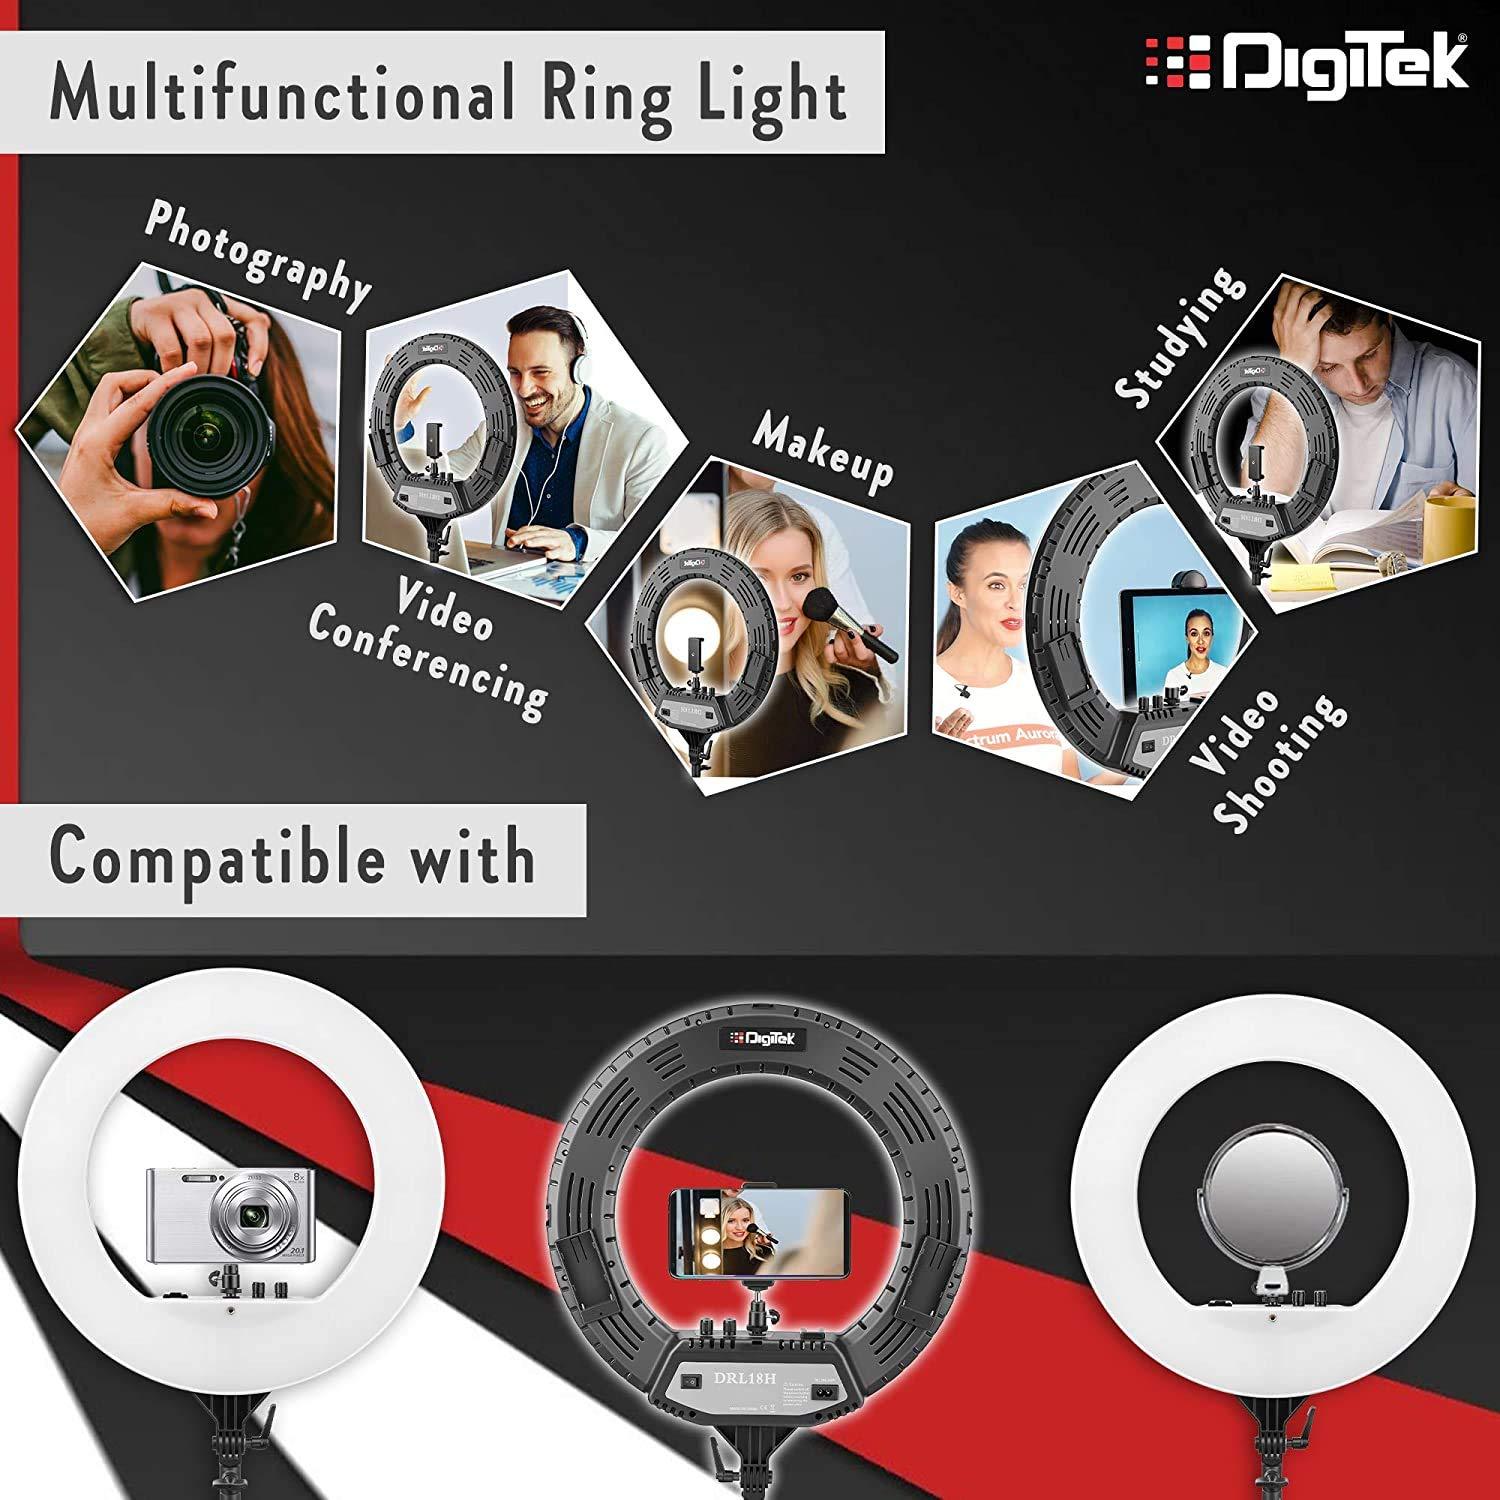 Digitek (DRL-18HC9) Professional 18" inch Ring Light with Stand | 2 Color Modes Dimmable Lighting | for YouTube Photo/Video Shoot Makeup & More | Compatible with iPhone/Android Phone & Camera, Black - Digitek